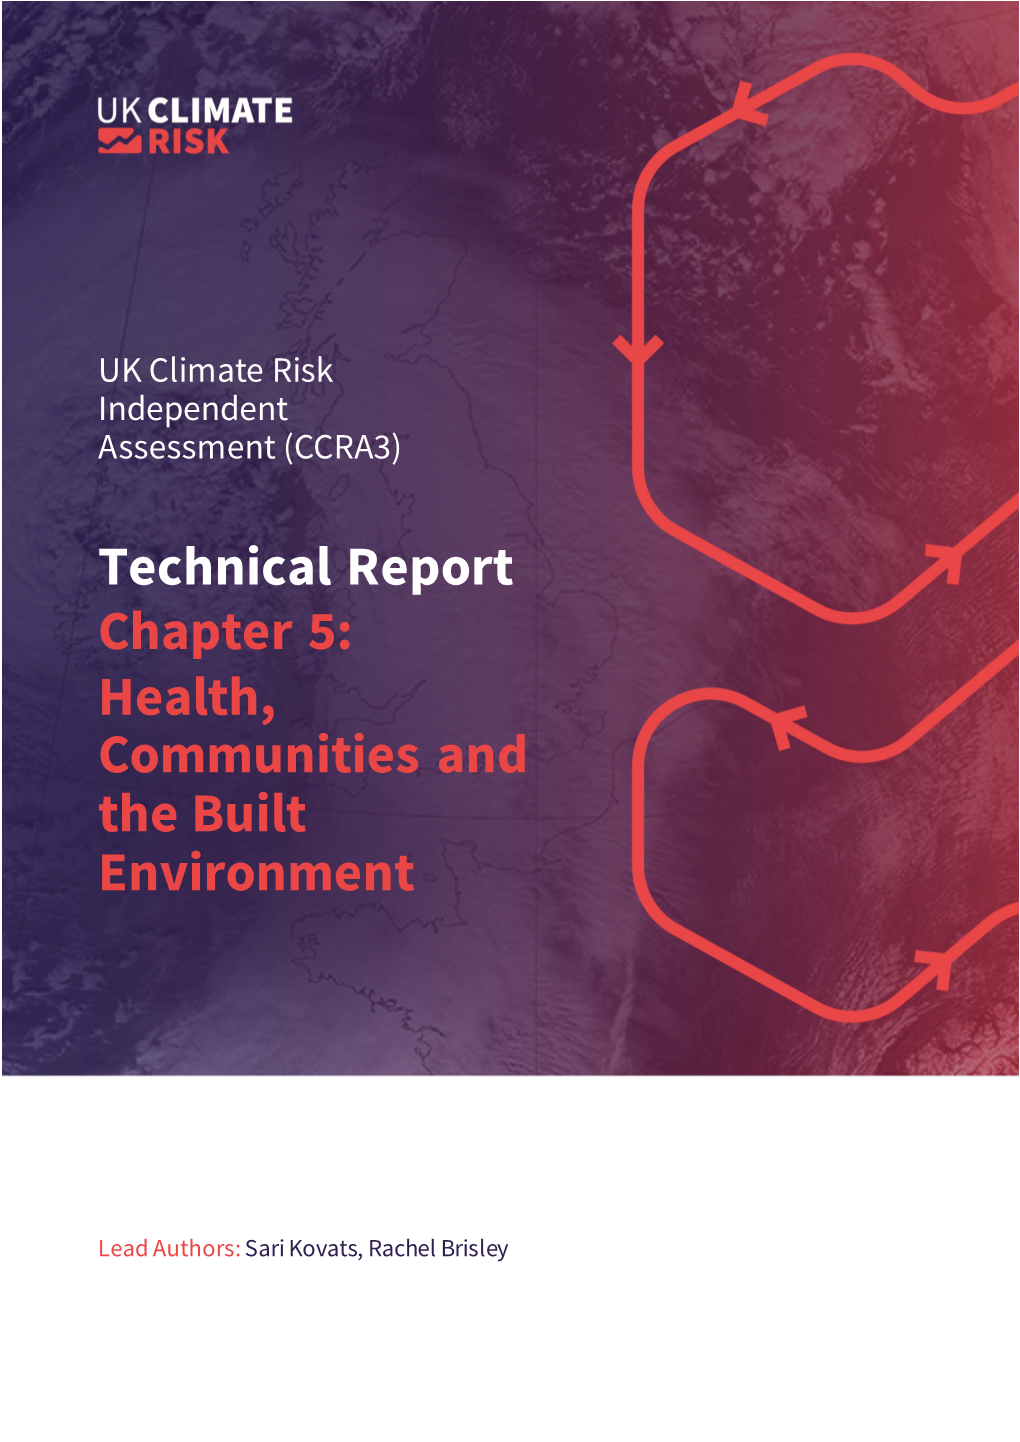 Technical Report Chapter 5: Health, Communities and the Built Environment